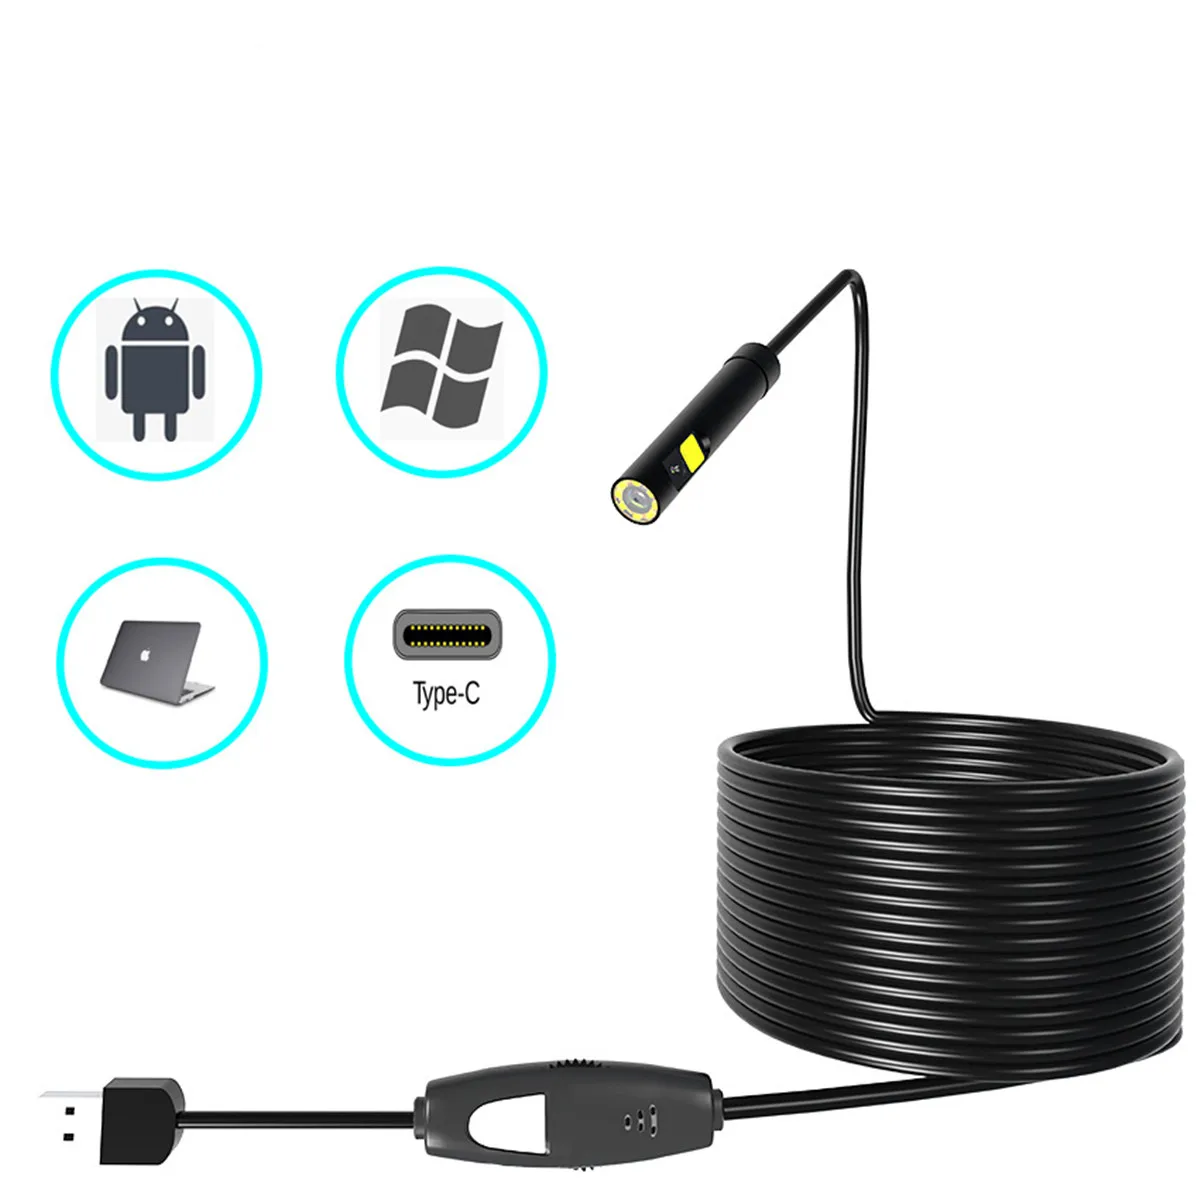 2MP 8MM 3in1 USB Dual Lens Endoscope Camera For Android&Computer CMOS Borescope Inspection  Digital Microscope Otoscope 4 3 inch screen dual lens endoscope wireless wifi microscope inspection borescope camera 3in1 usb otoscope